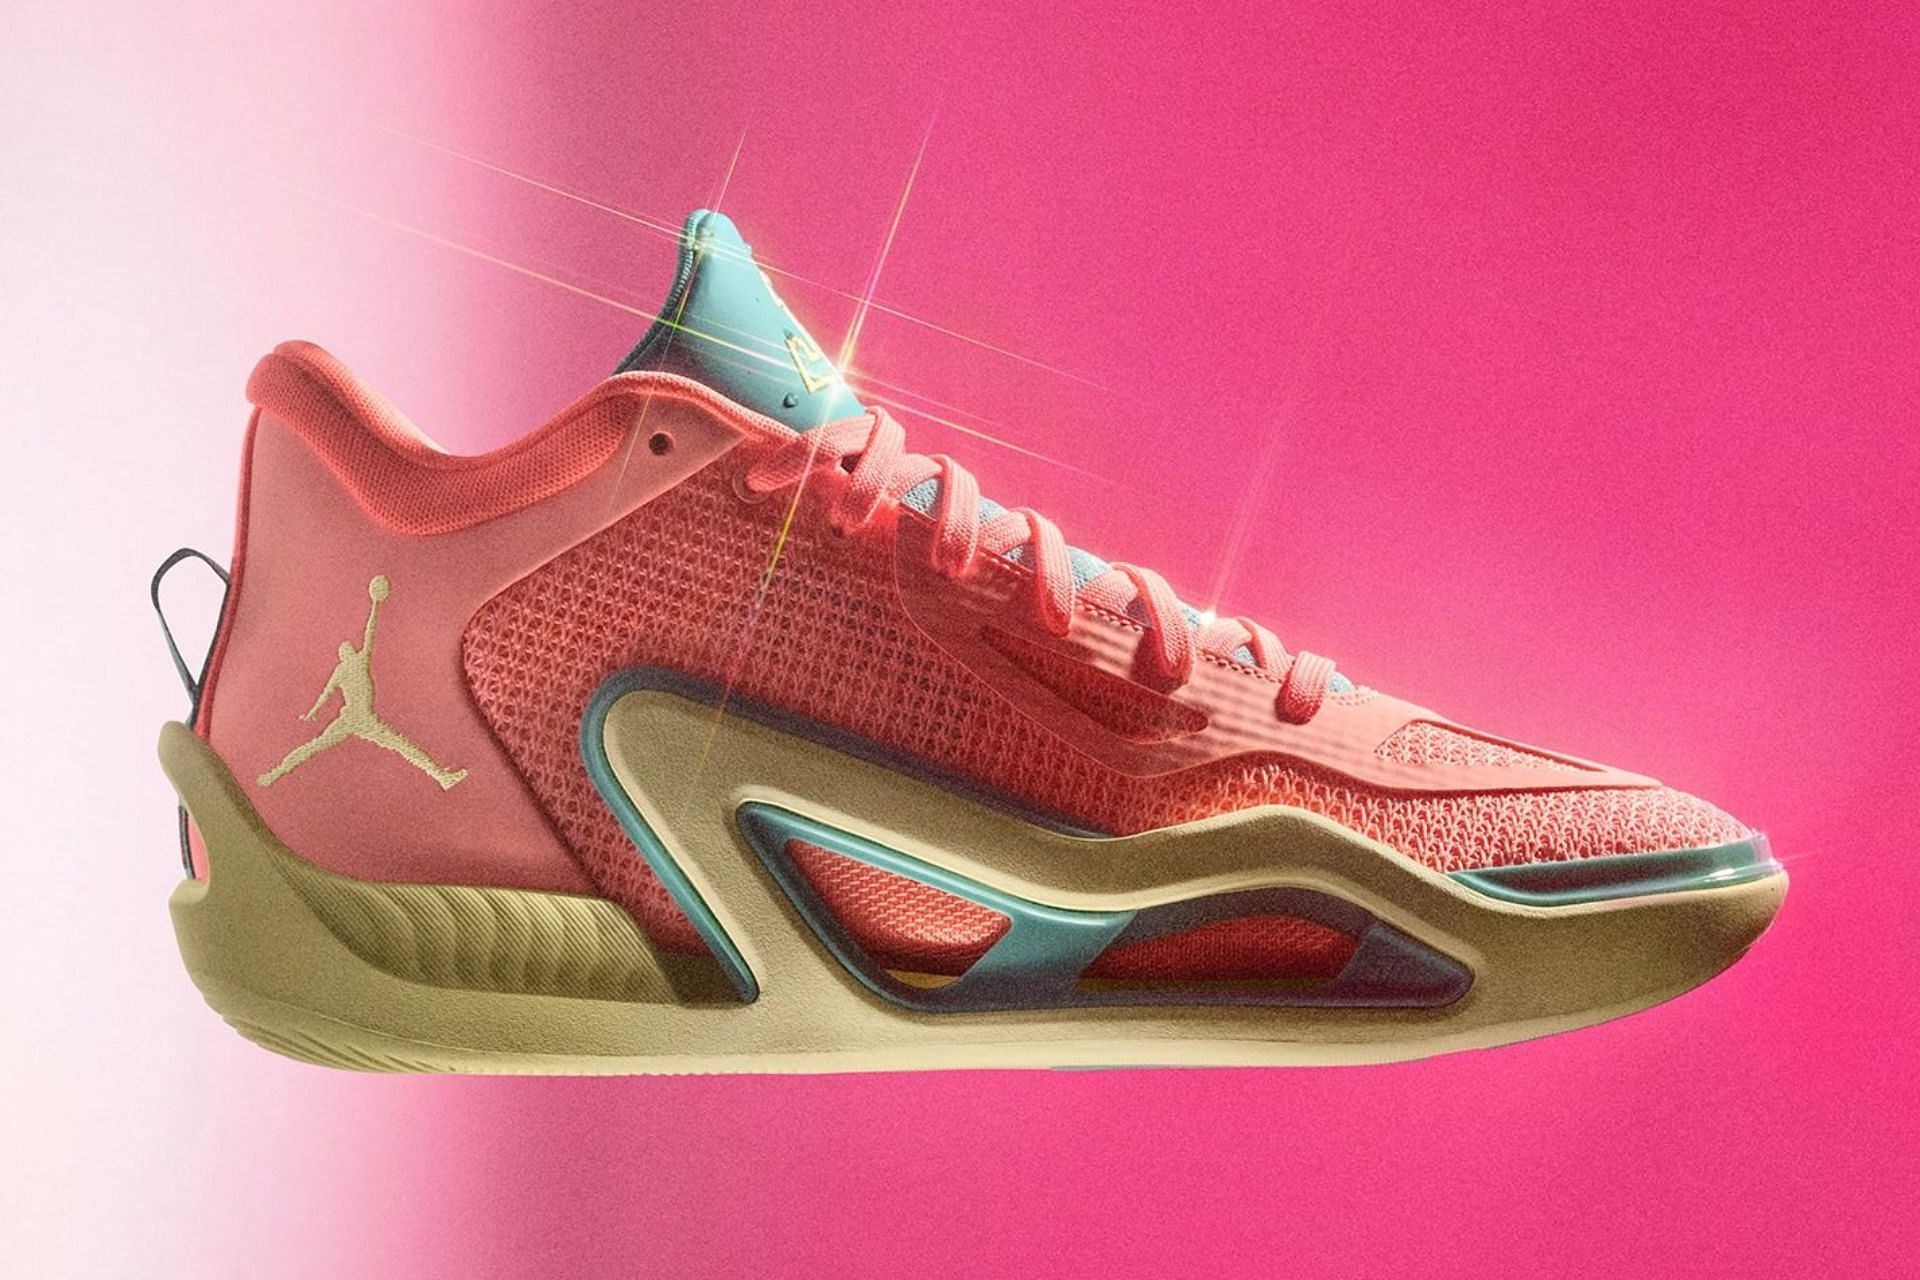 Take a closer look at the upcoming collab sneakers (Image via Nike)